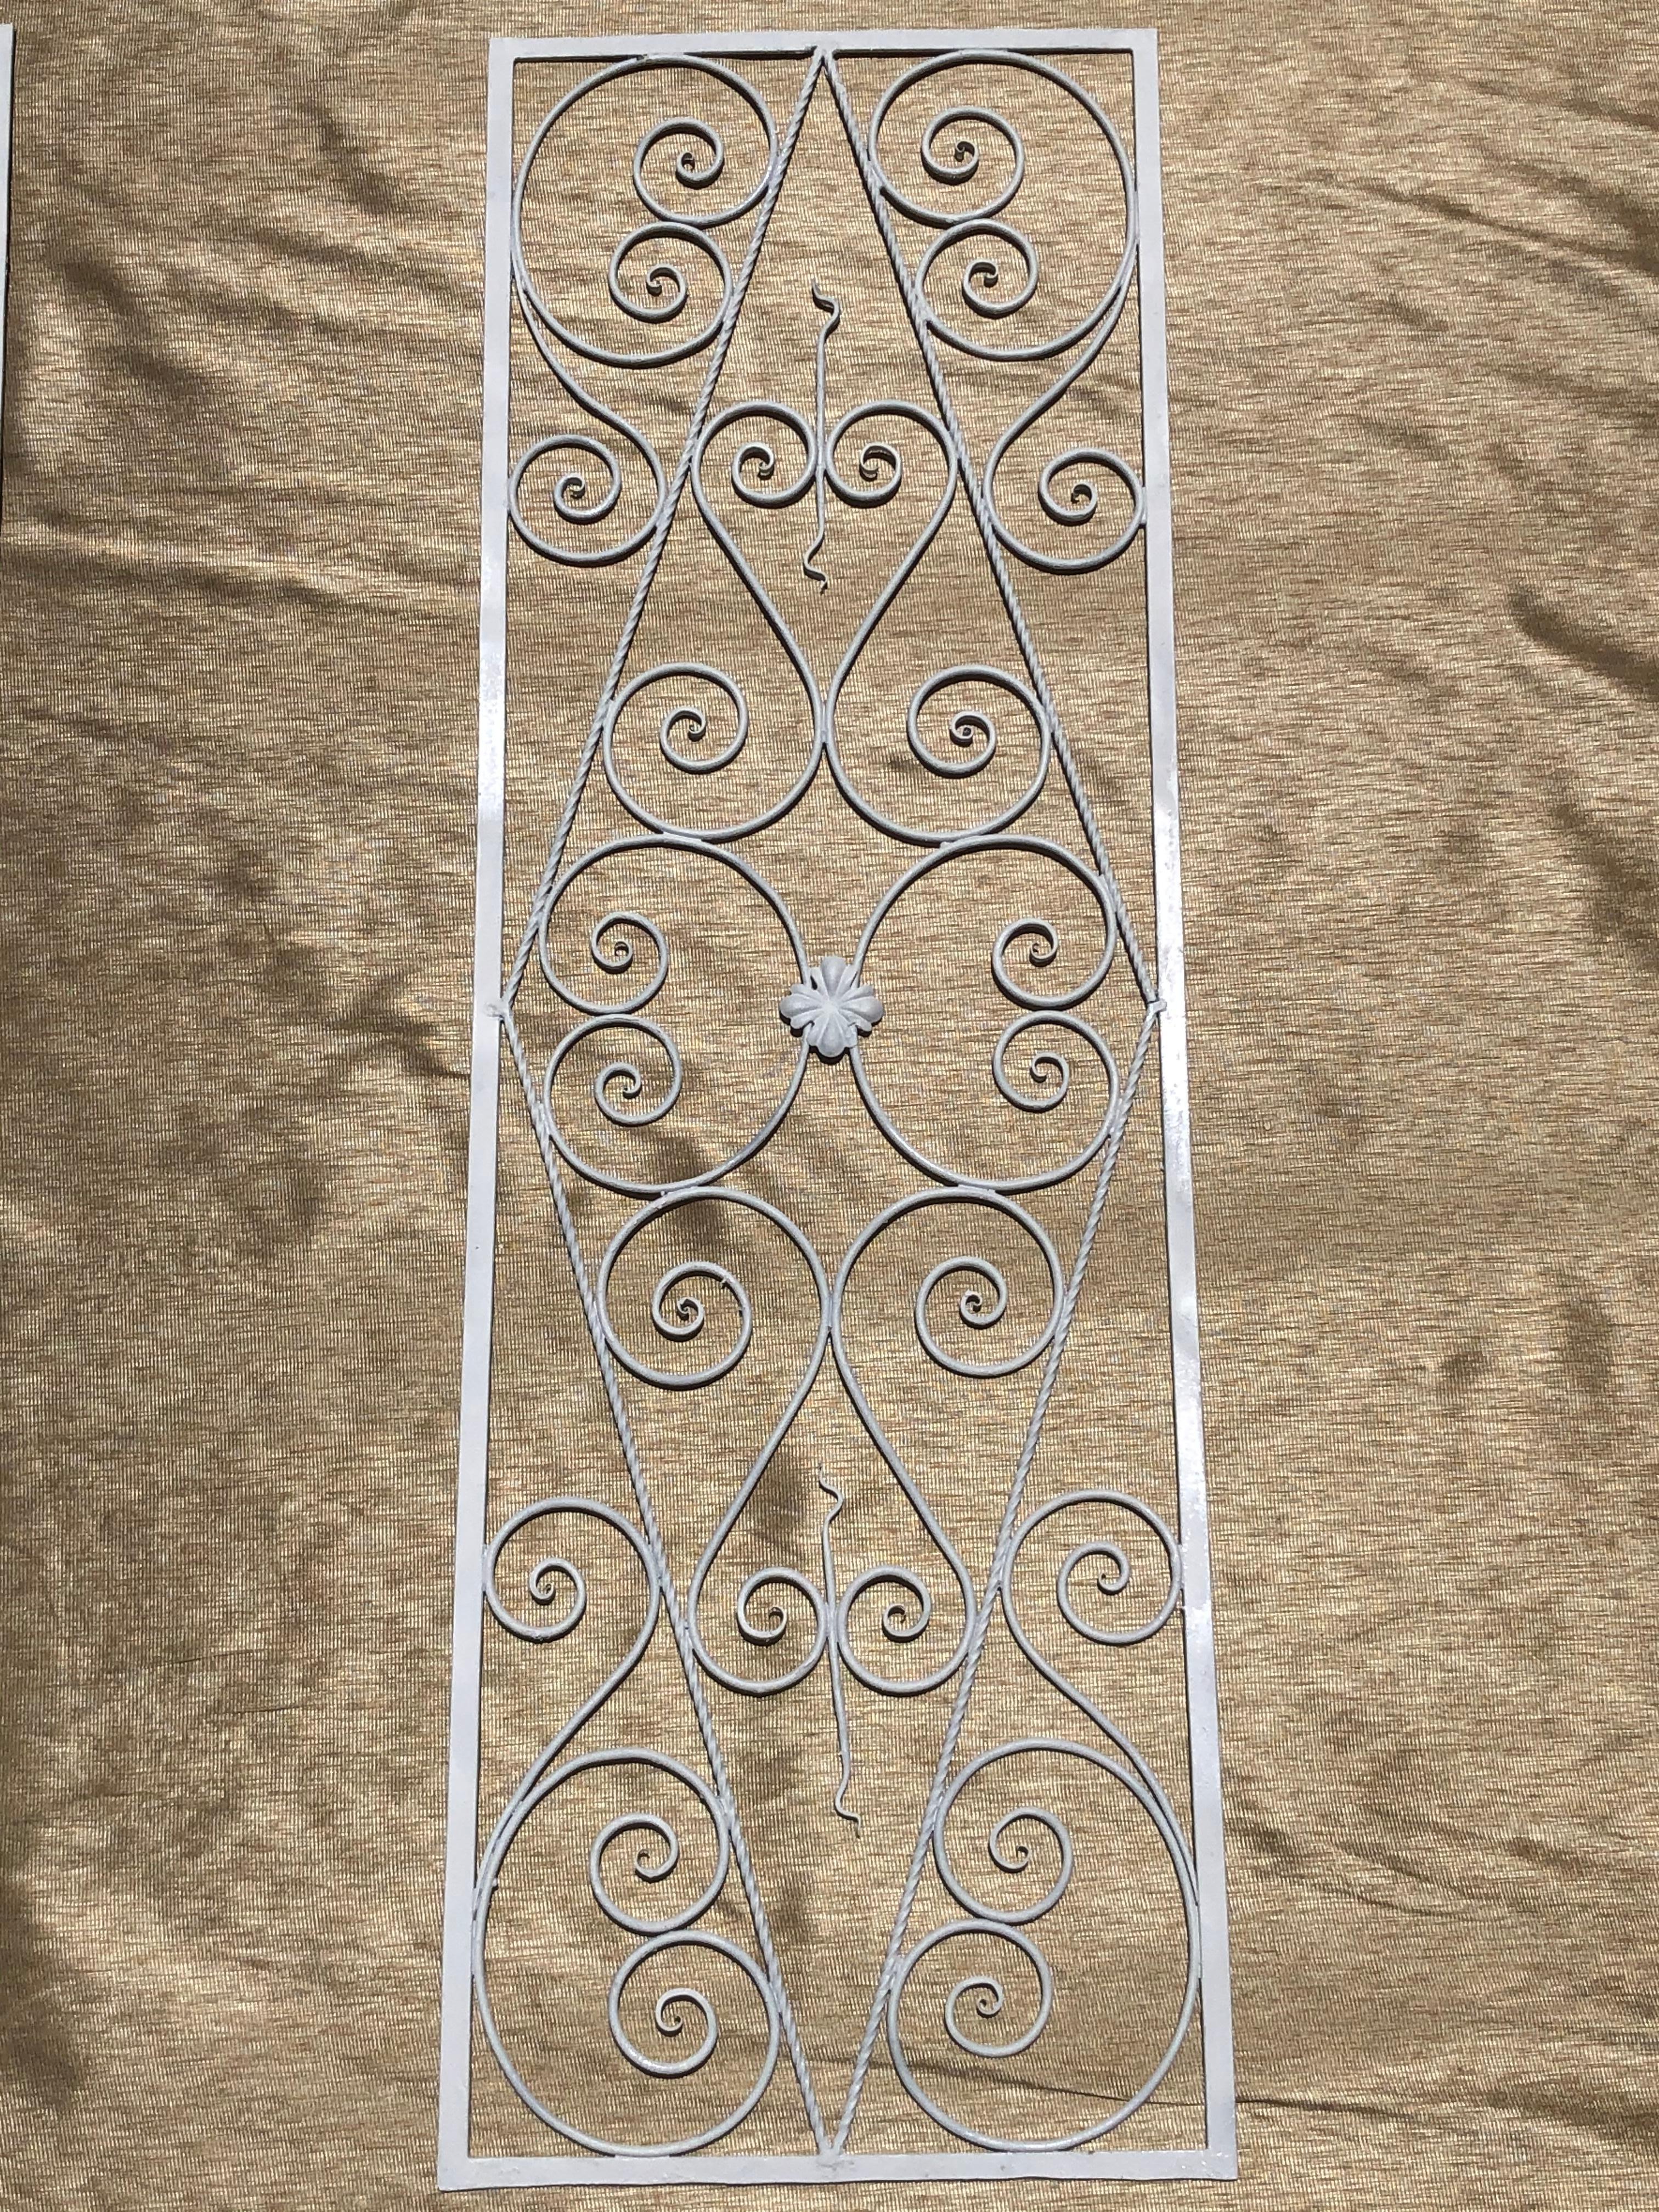 Elegant hand forged white iron panels, perfect for interior and exterior decor. Can be hung on wall in home or outdoors in garden space.